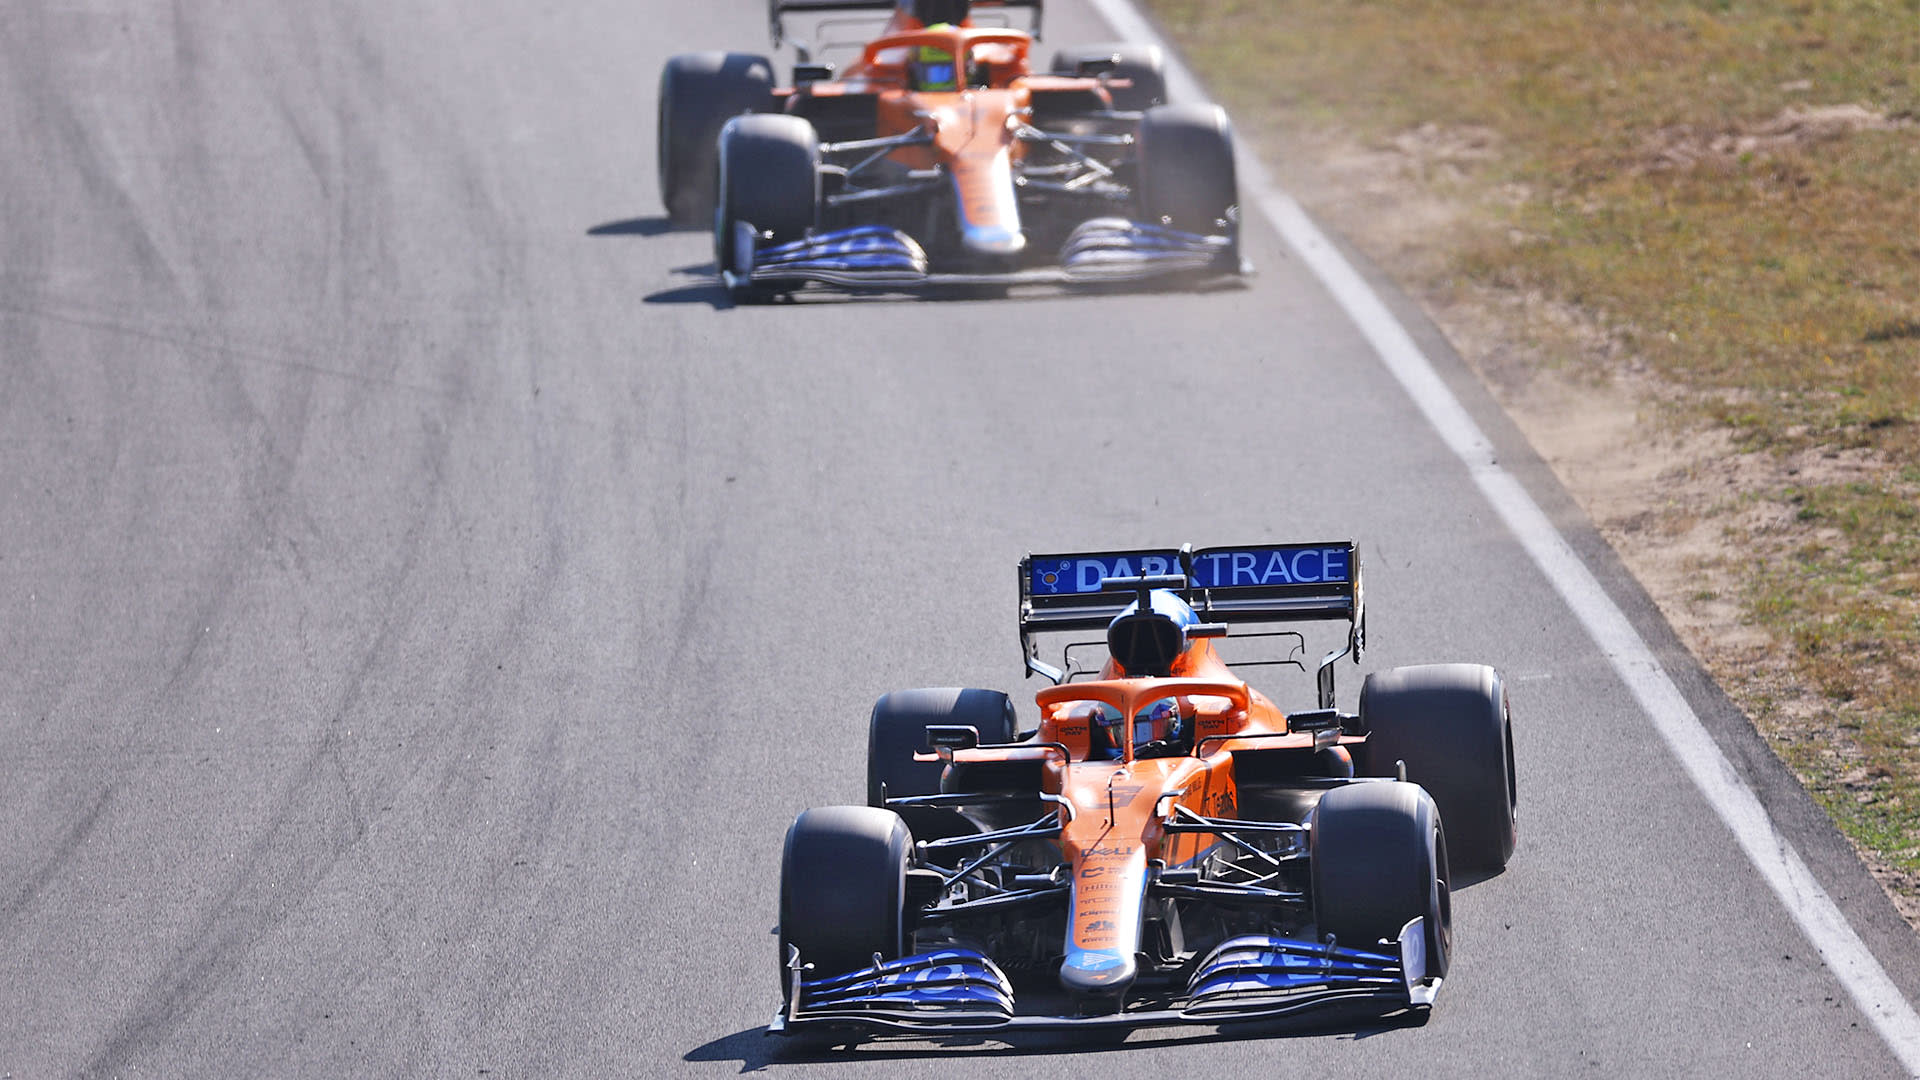 McLaren drivers happy to put abnormal Dutch GP weekend behind them after losing P3 to Ferrari Formula 1®